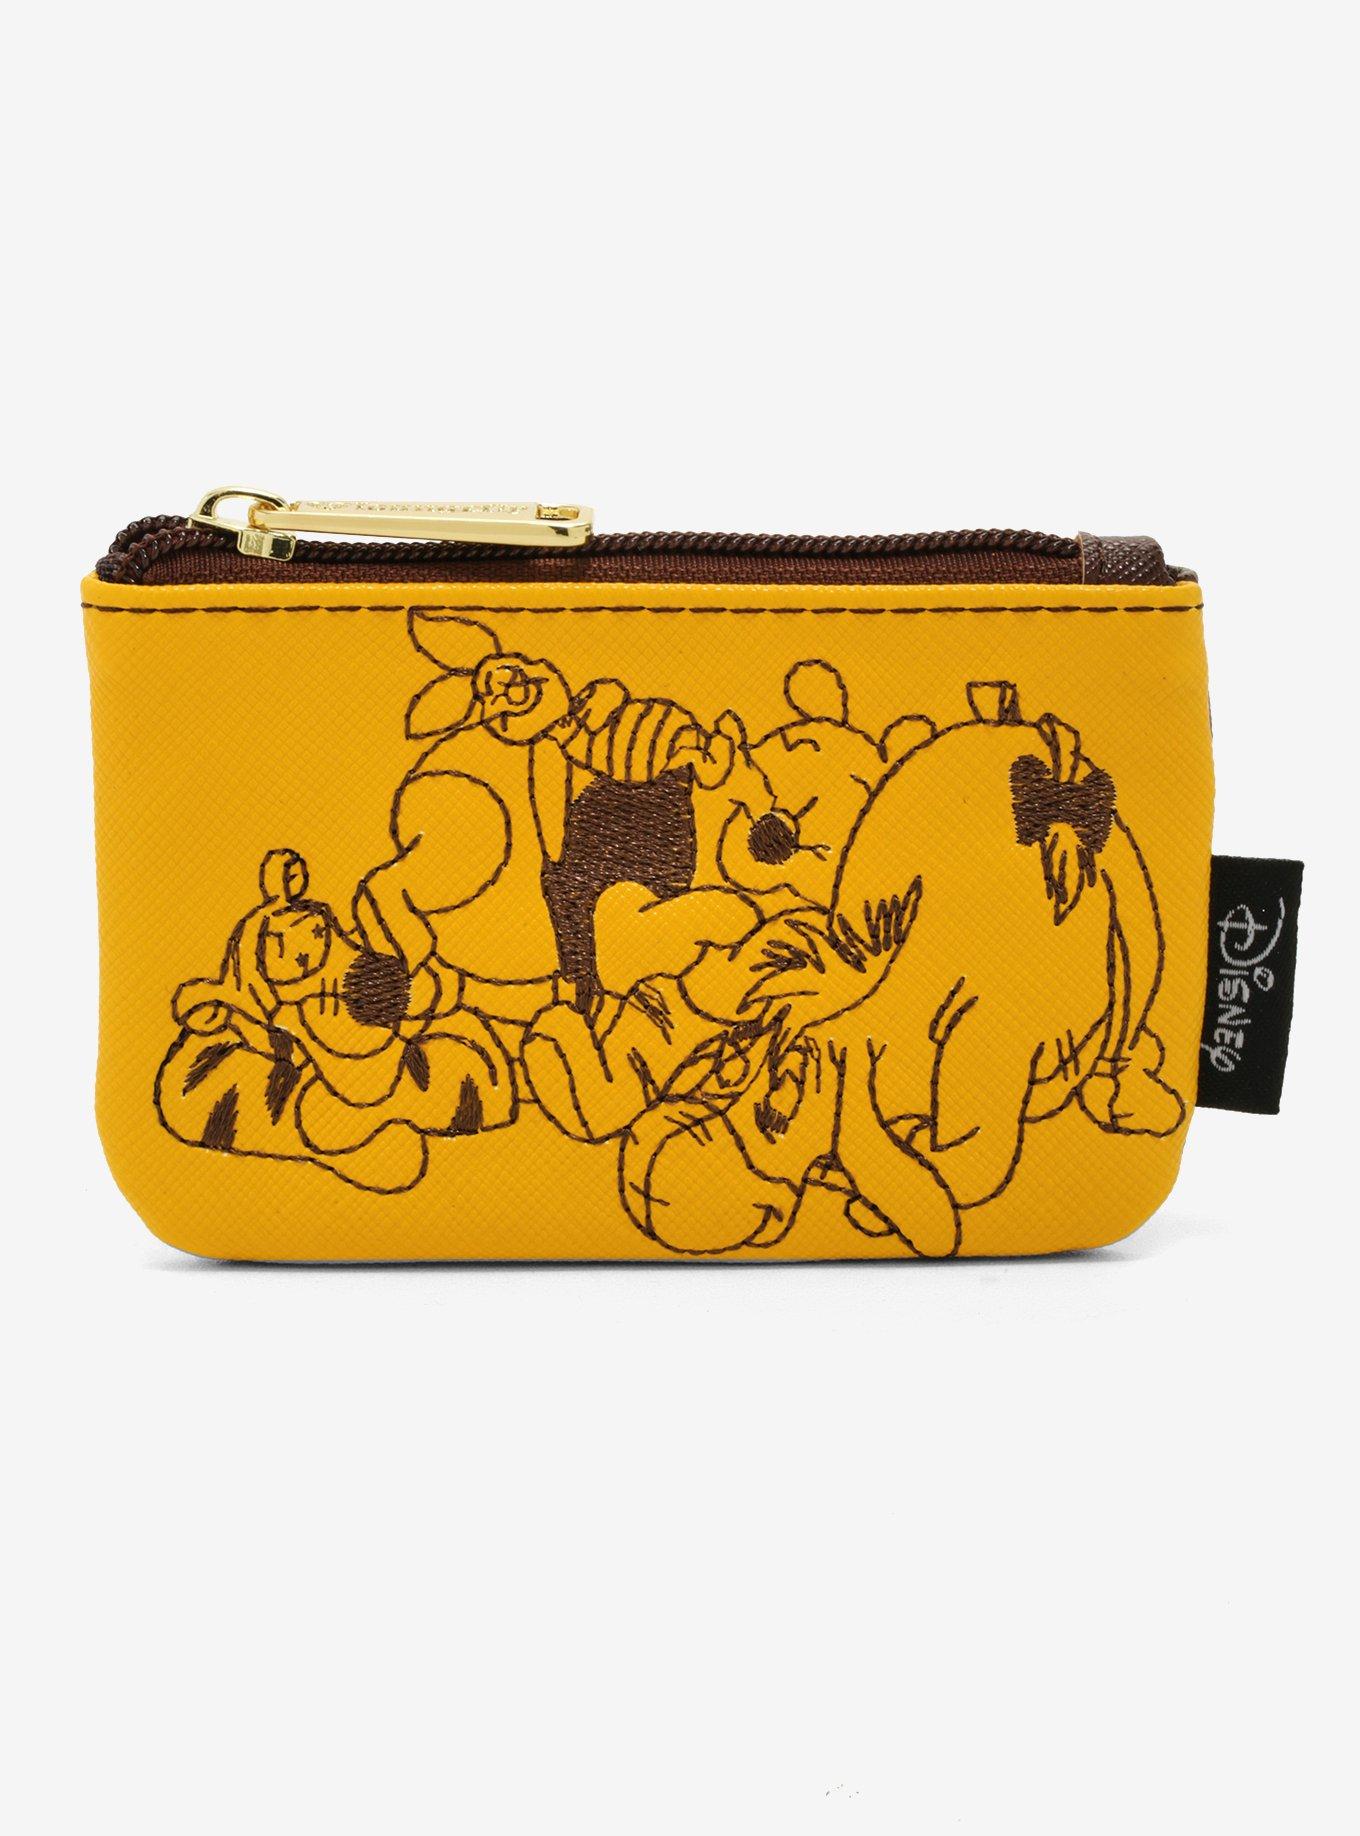 Disney Winnie The Pooh Autumn Cardholder - BoxLunch Exclusive, , hi-res